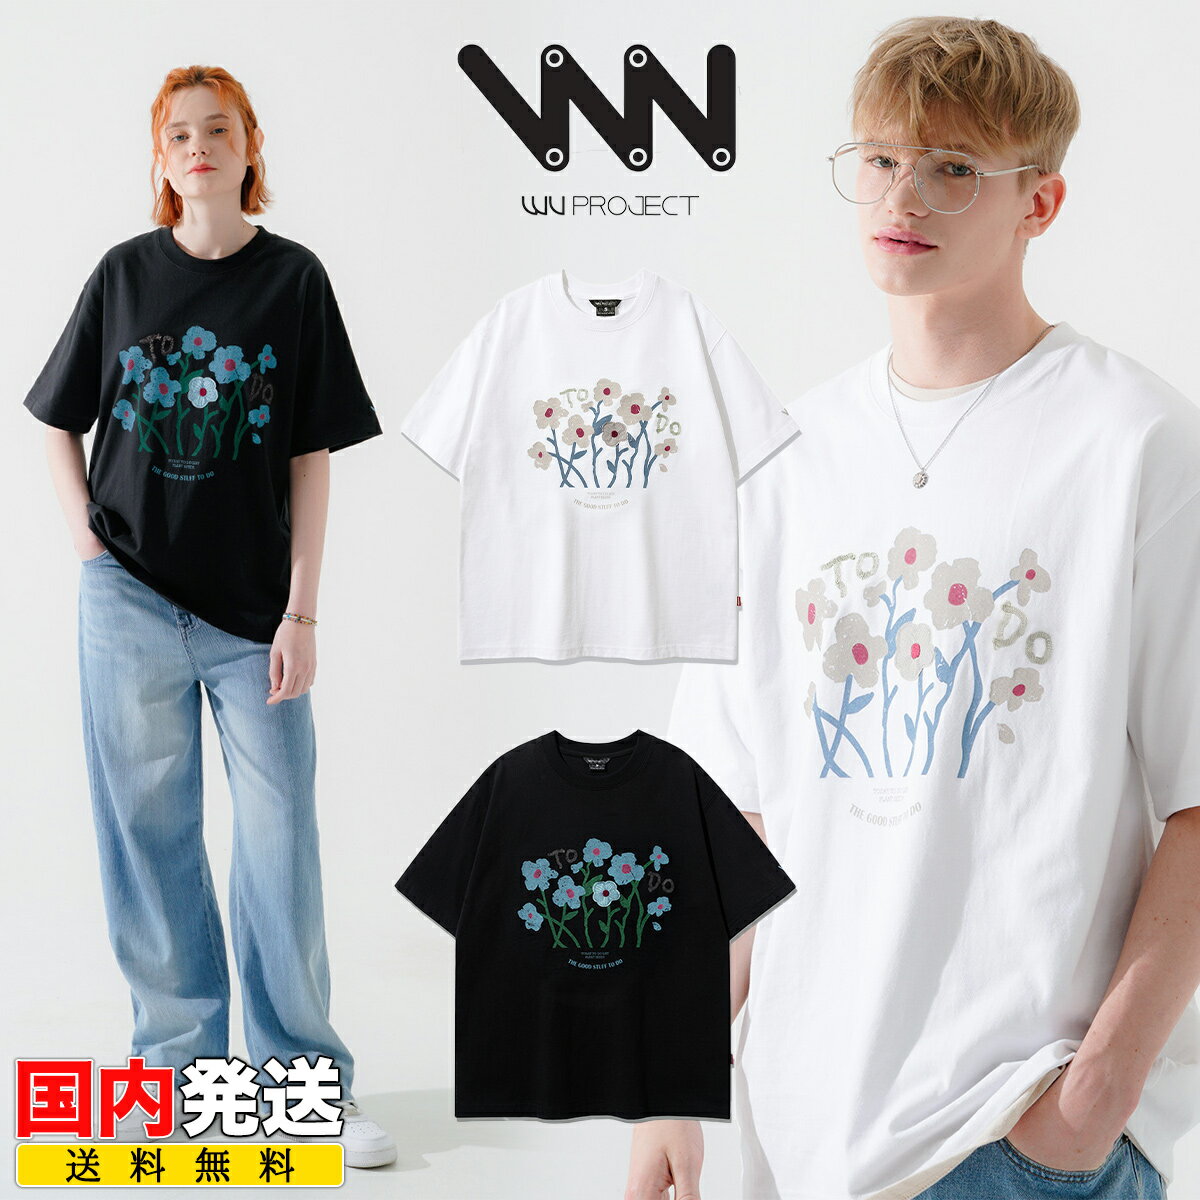 WV PROJECT TVc WV vWFNg Plant Seed 1/2 Sleeve T-shirts I[o[TCY  S jZbNX ؍ K-POP |\l AChp Ki Y fB[X _u[uC JIST7661 [ߗ]